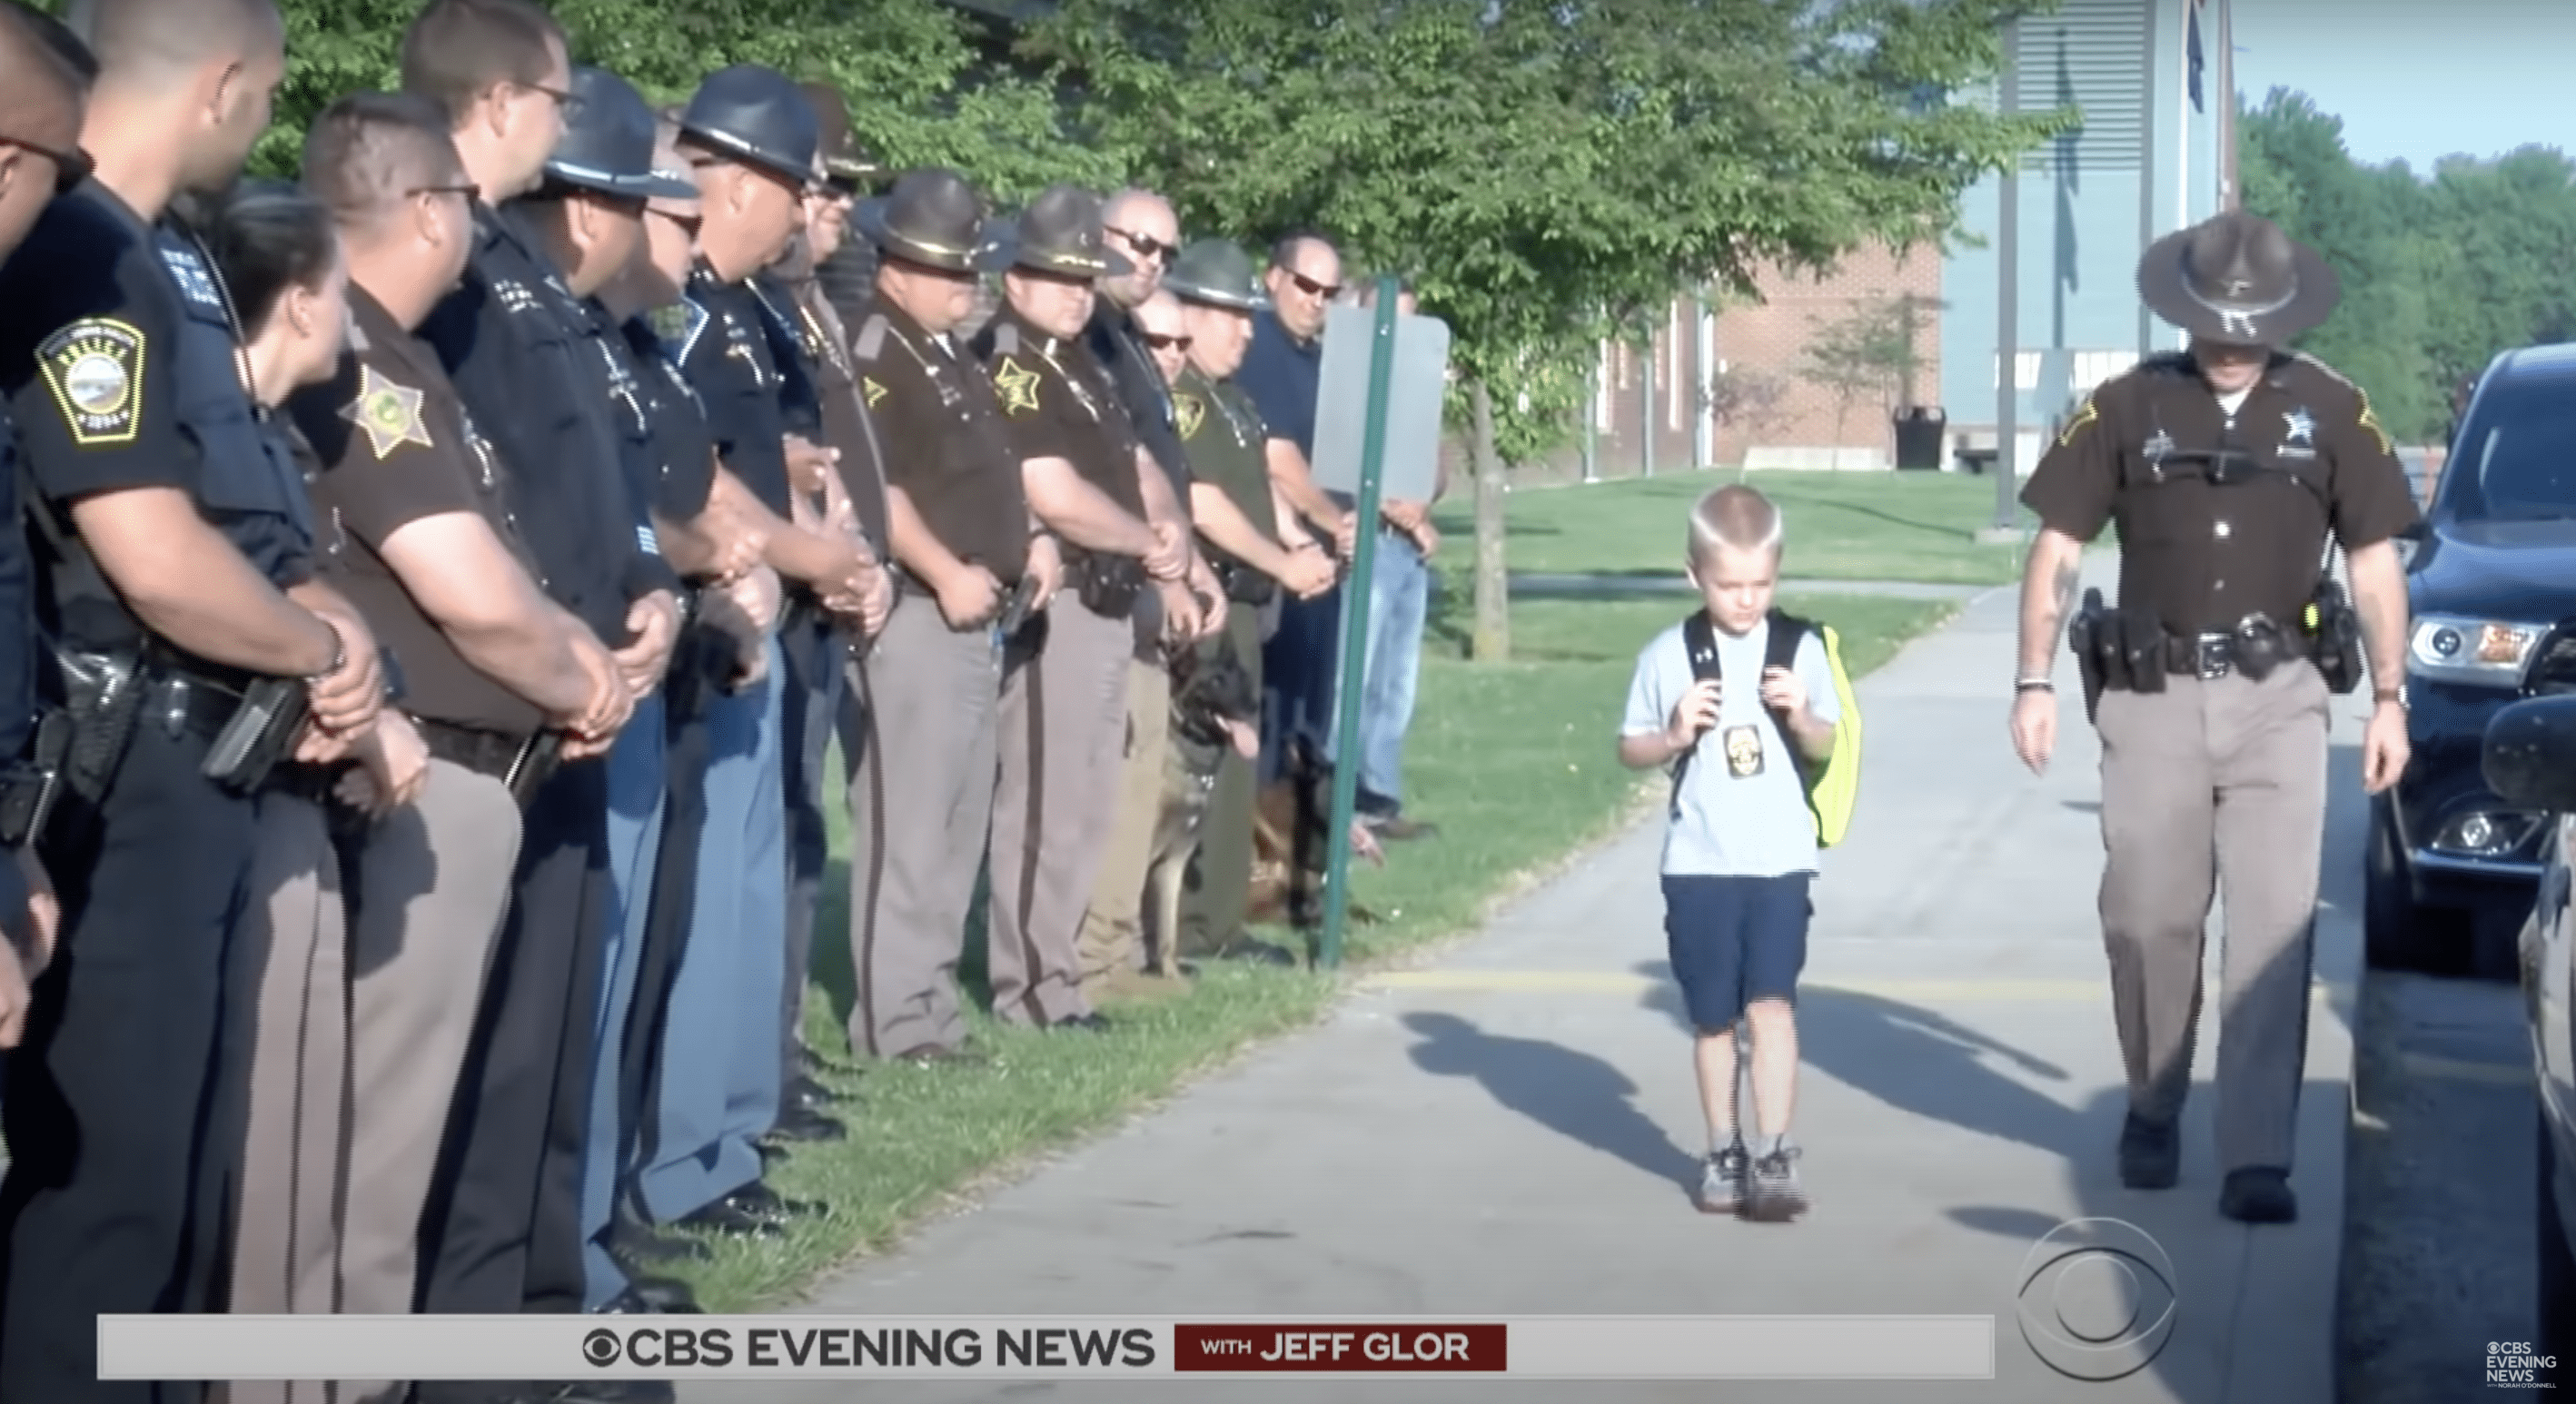 Dakota Pitts walked to school while officers lined up to support him | Source: YouTube.com/CBS Evening News